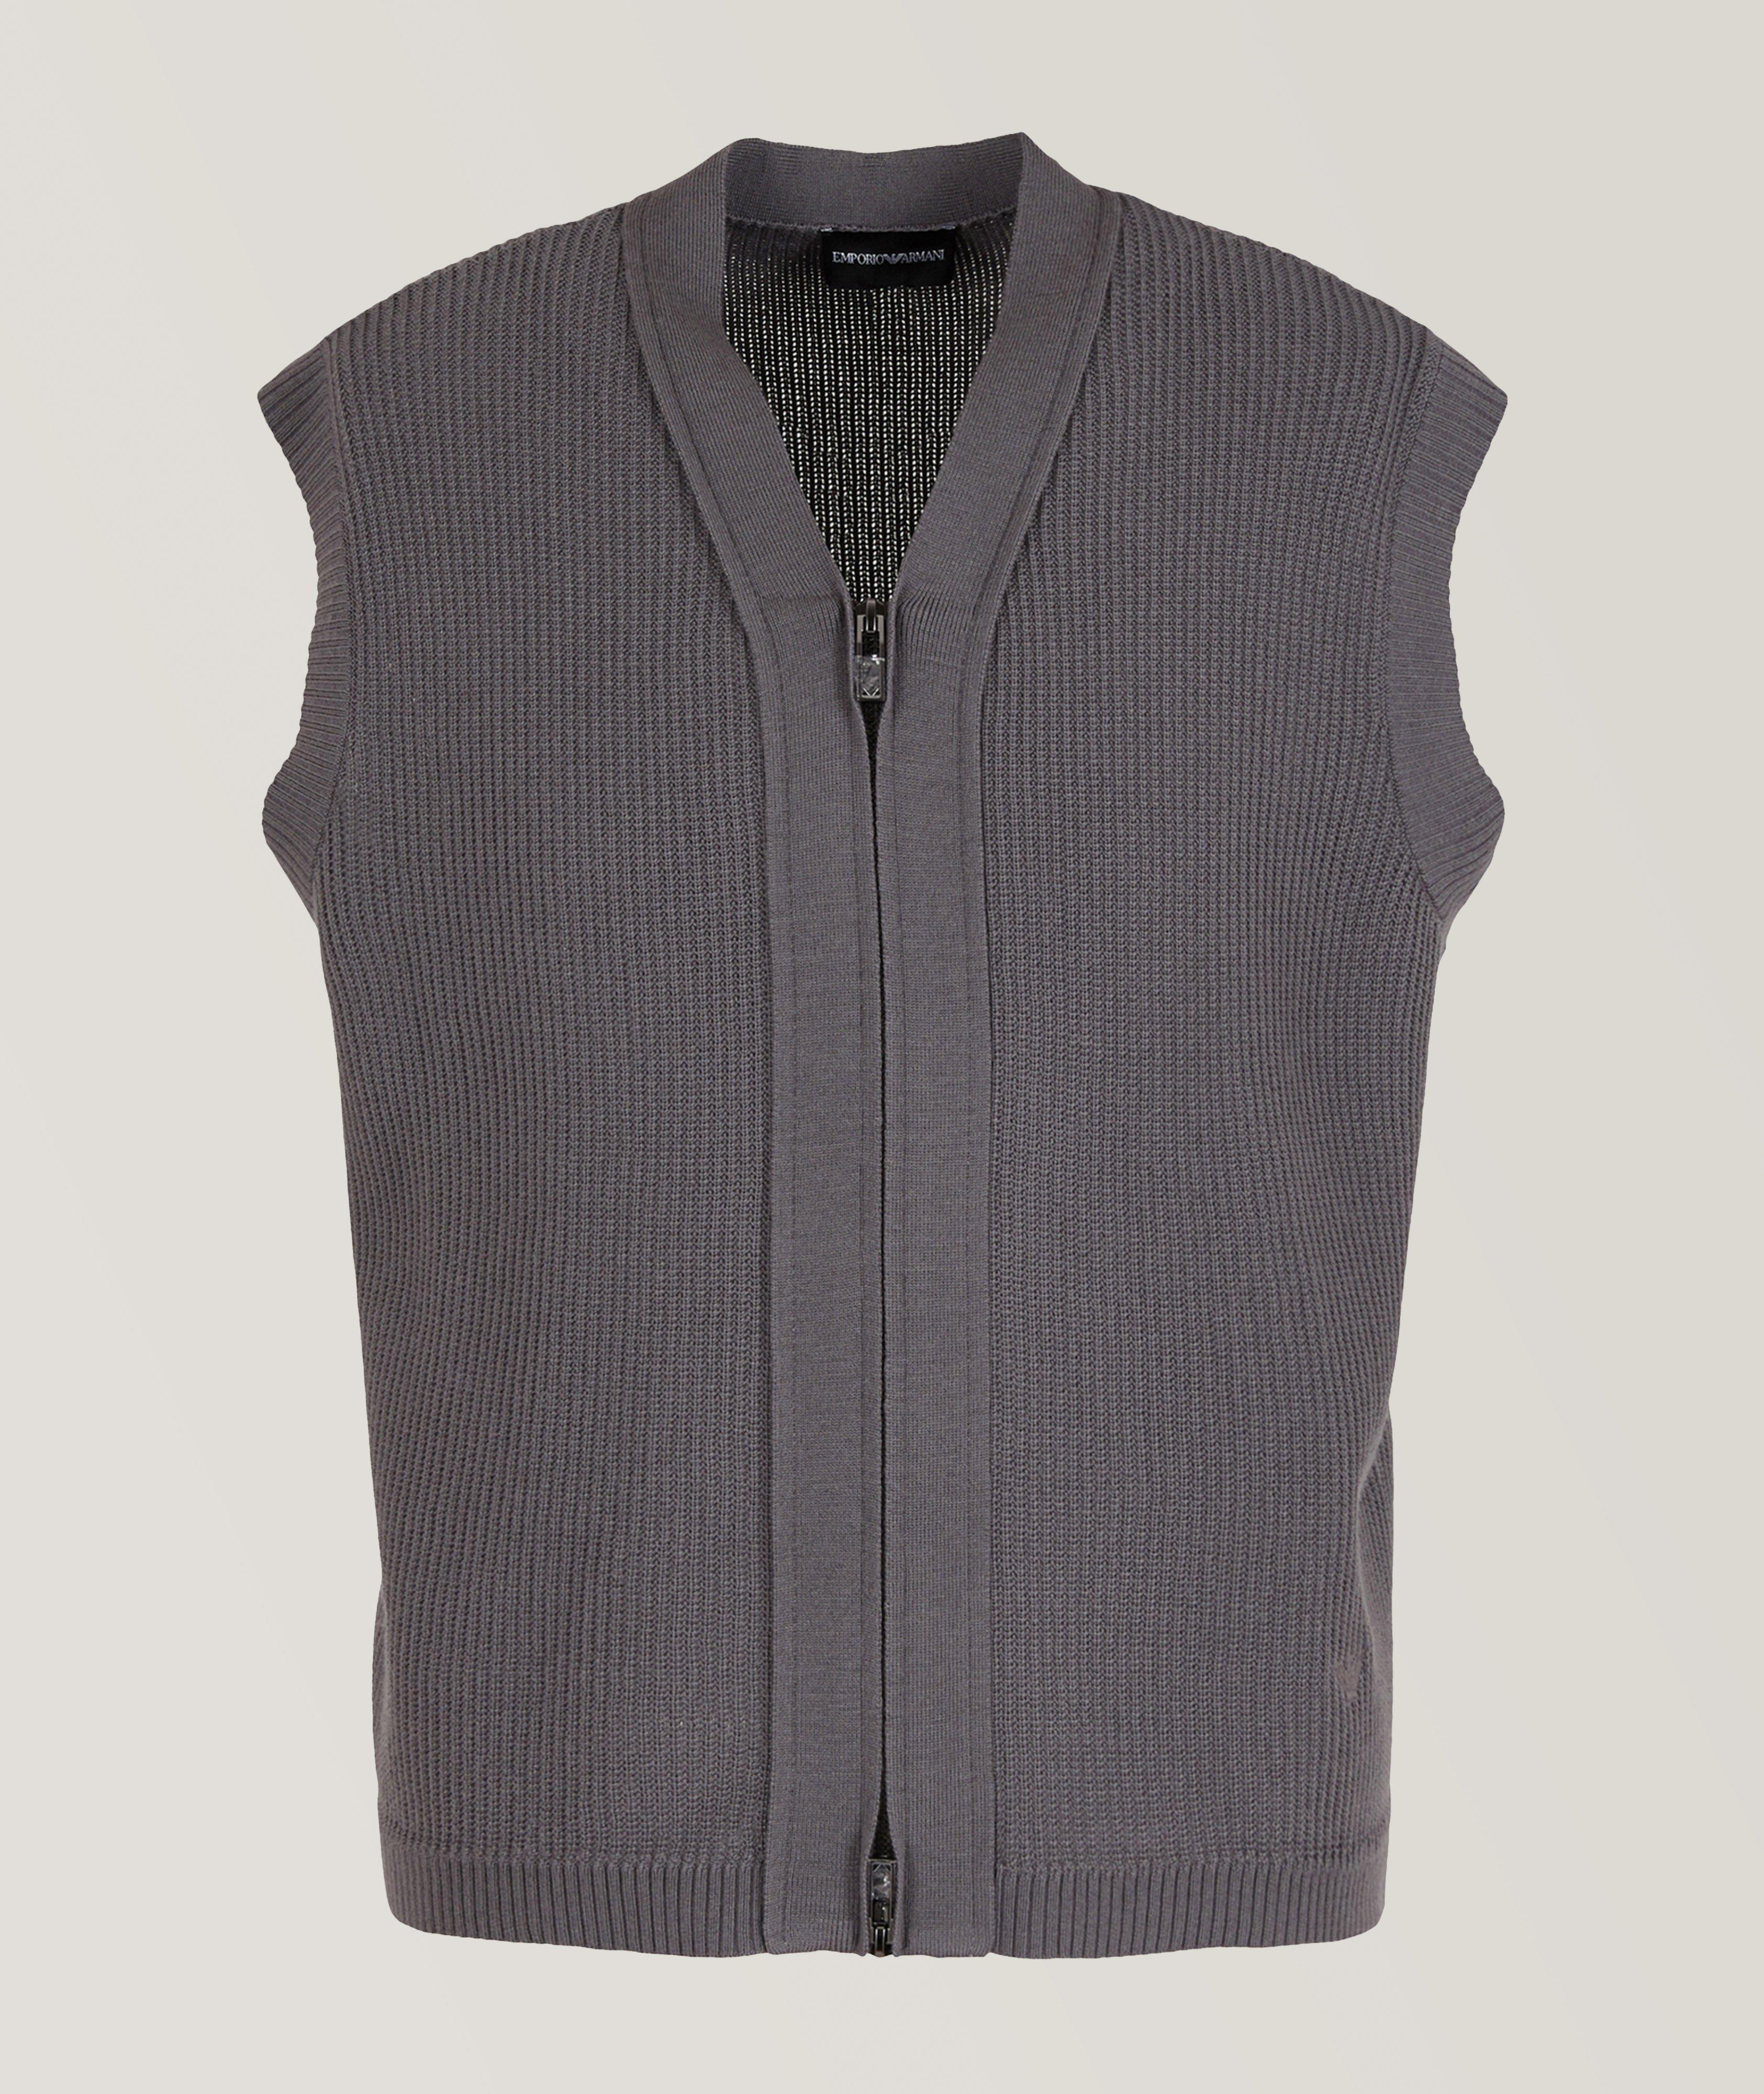 Ribbed Knit Virgin Wool-Cotton Sweater Vest image 0